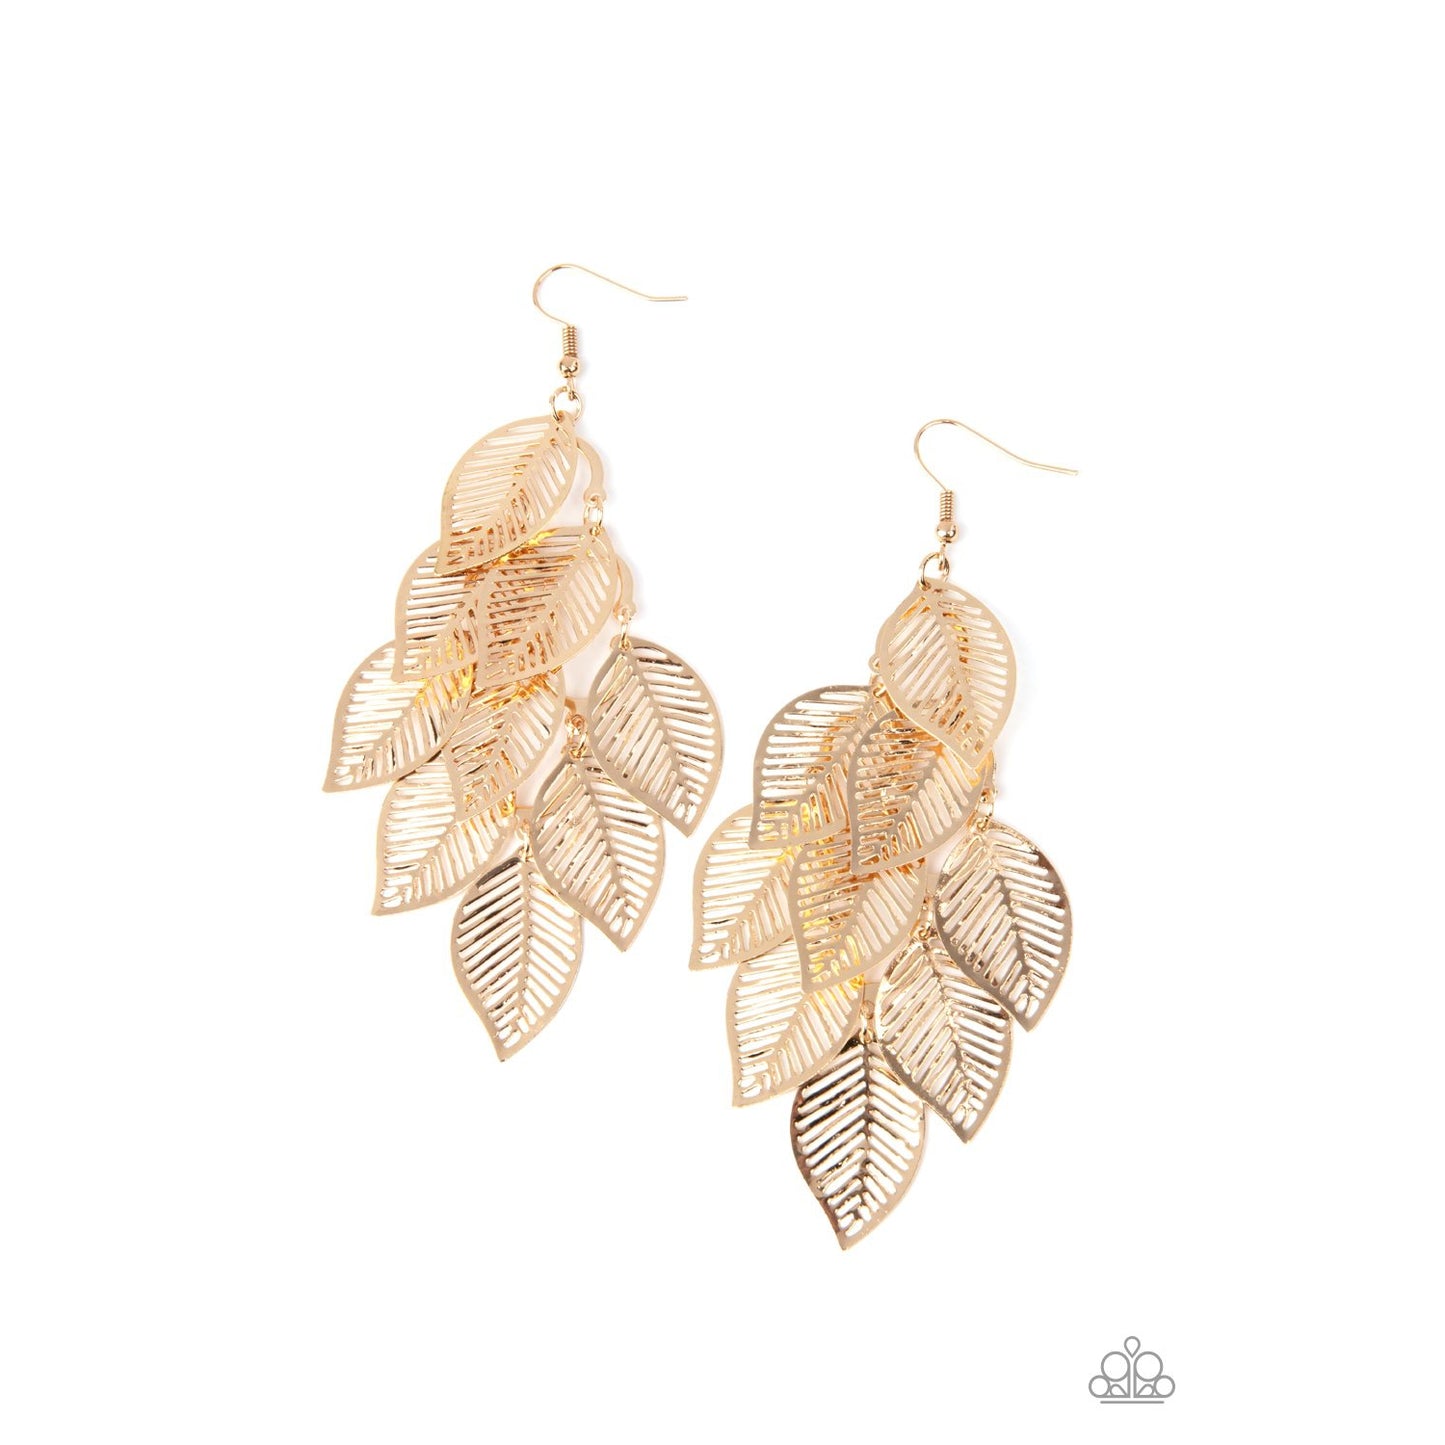 Limitlessly Leafy - Gold Earrings - Paparazzi Accessories - GlaMarous Titi Jewels